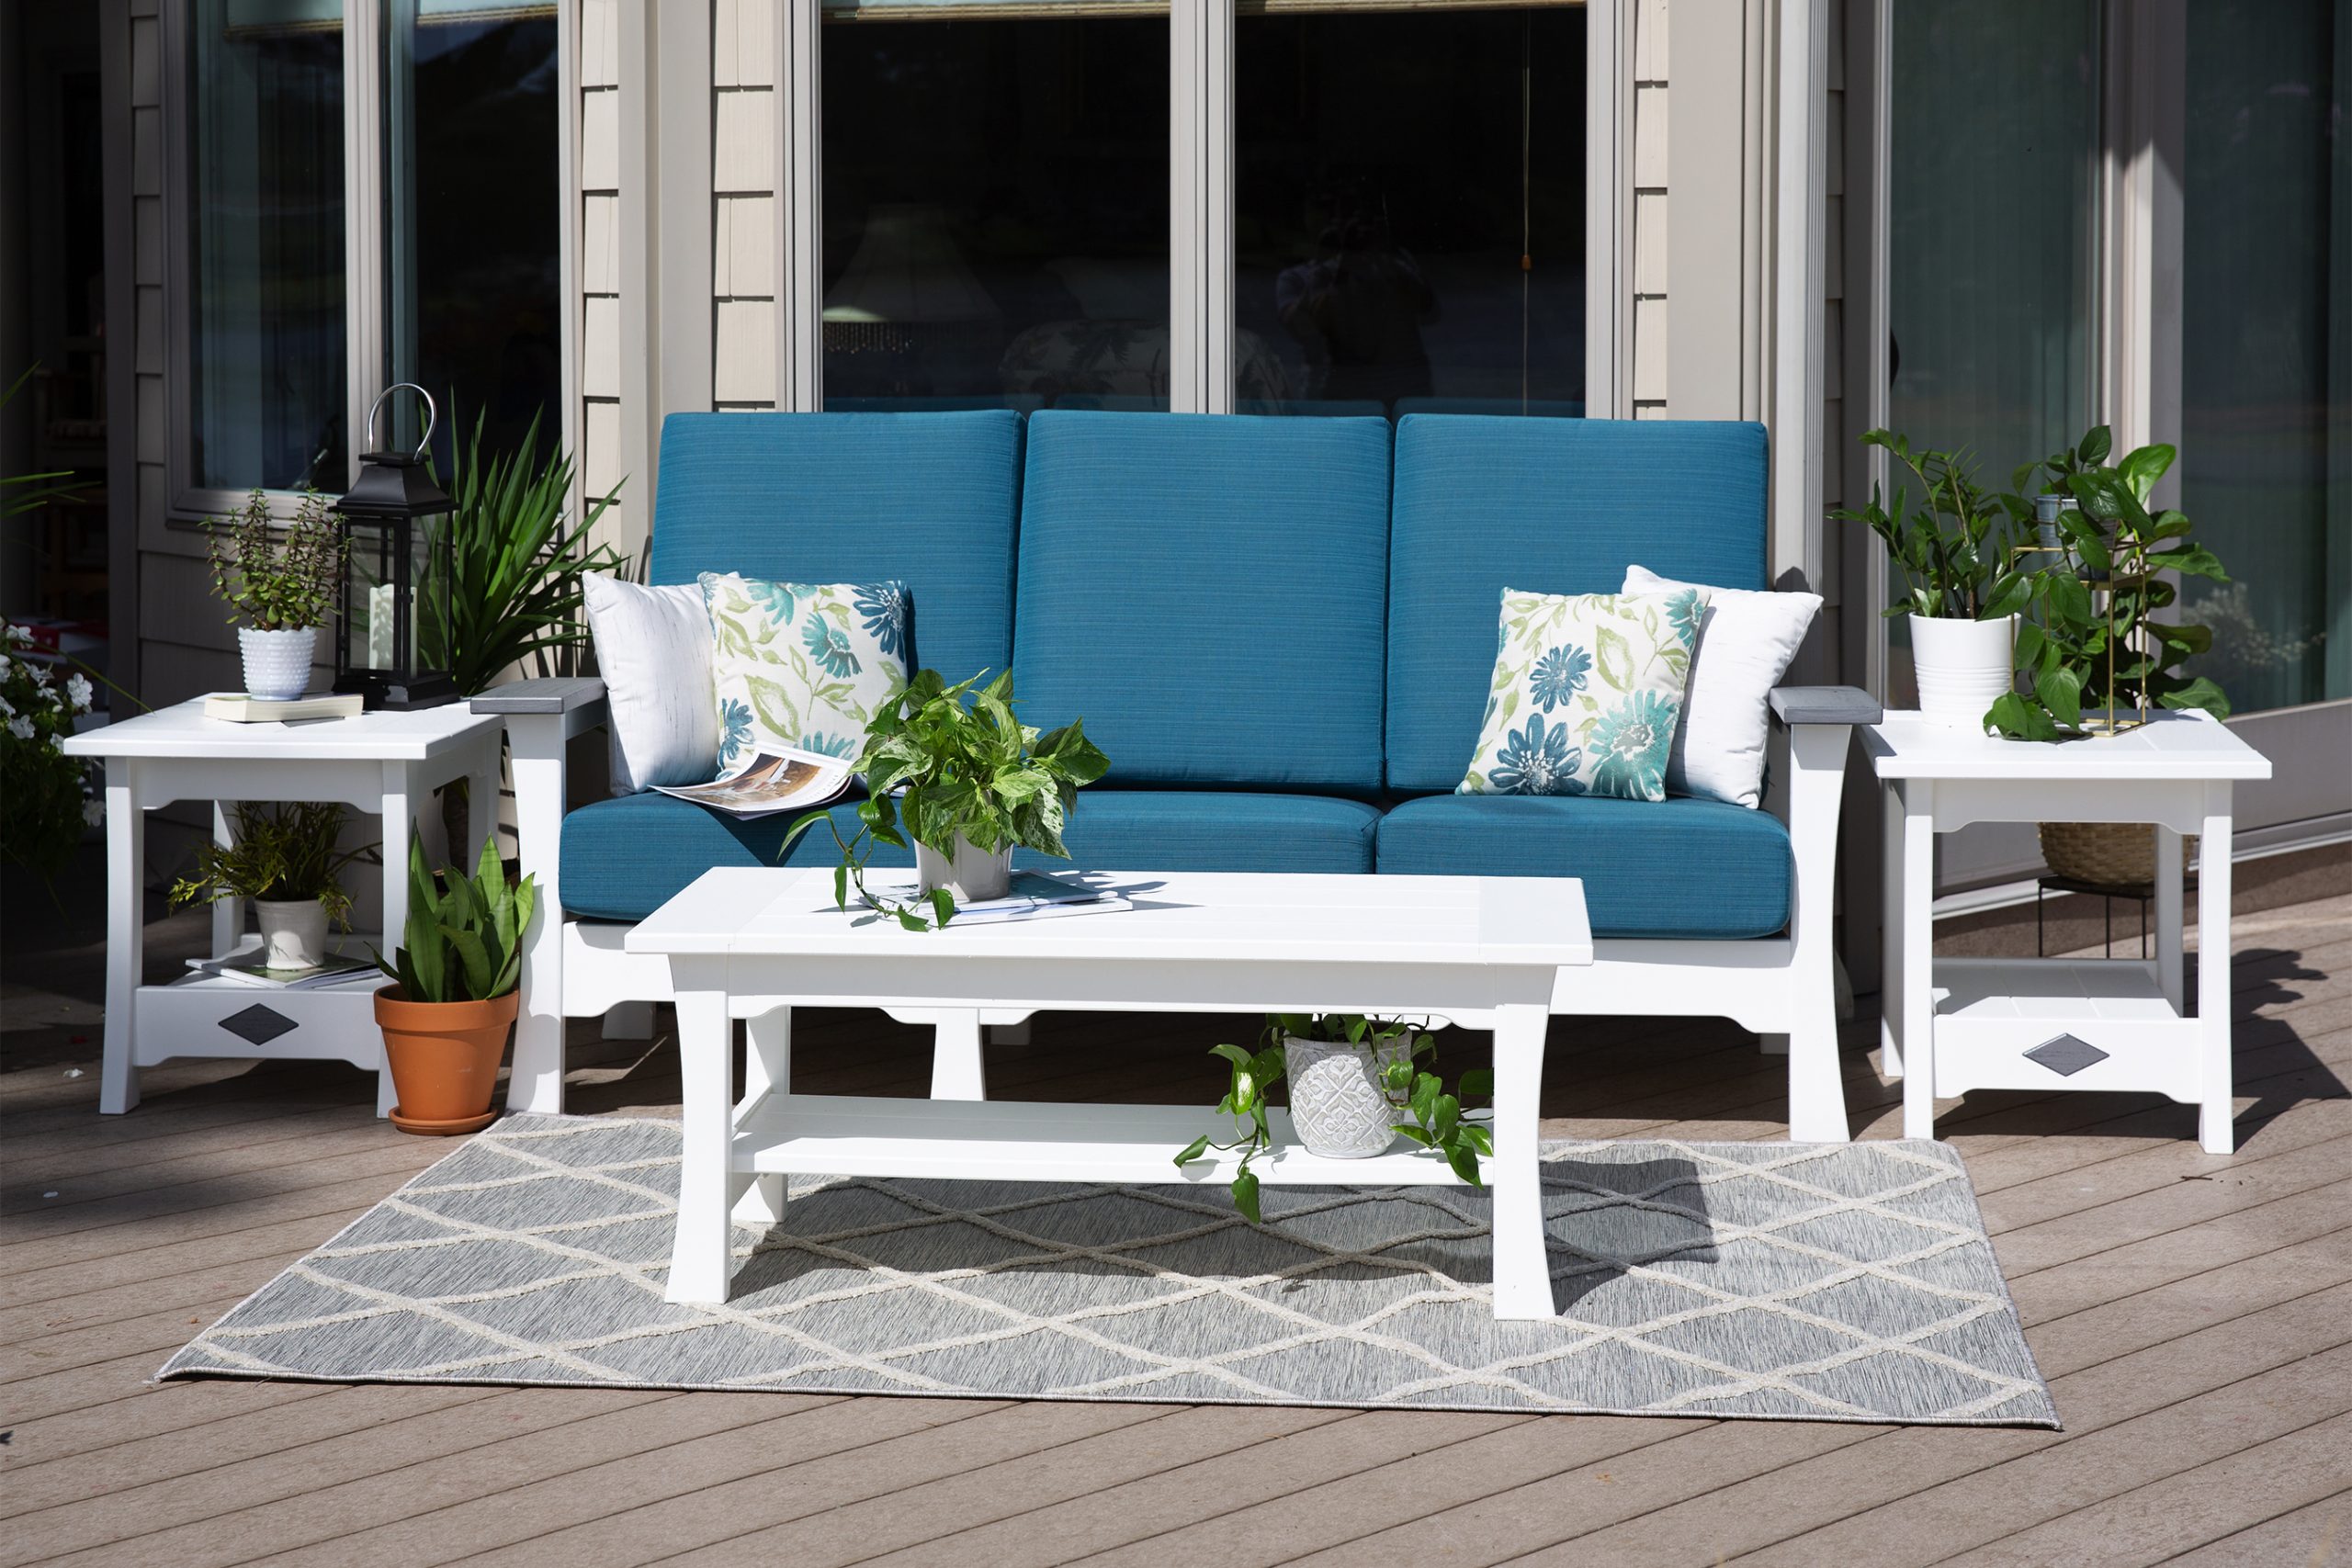 Blue and white outdoor furniture set on rub on top of beautiful deck